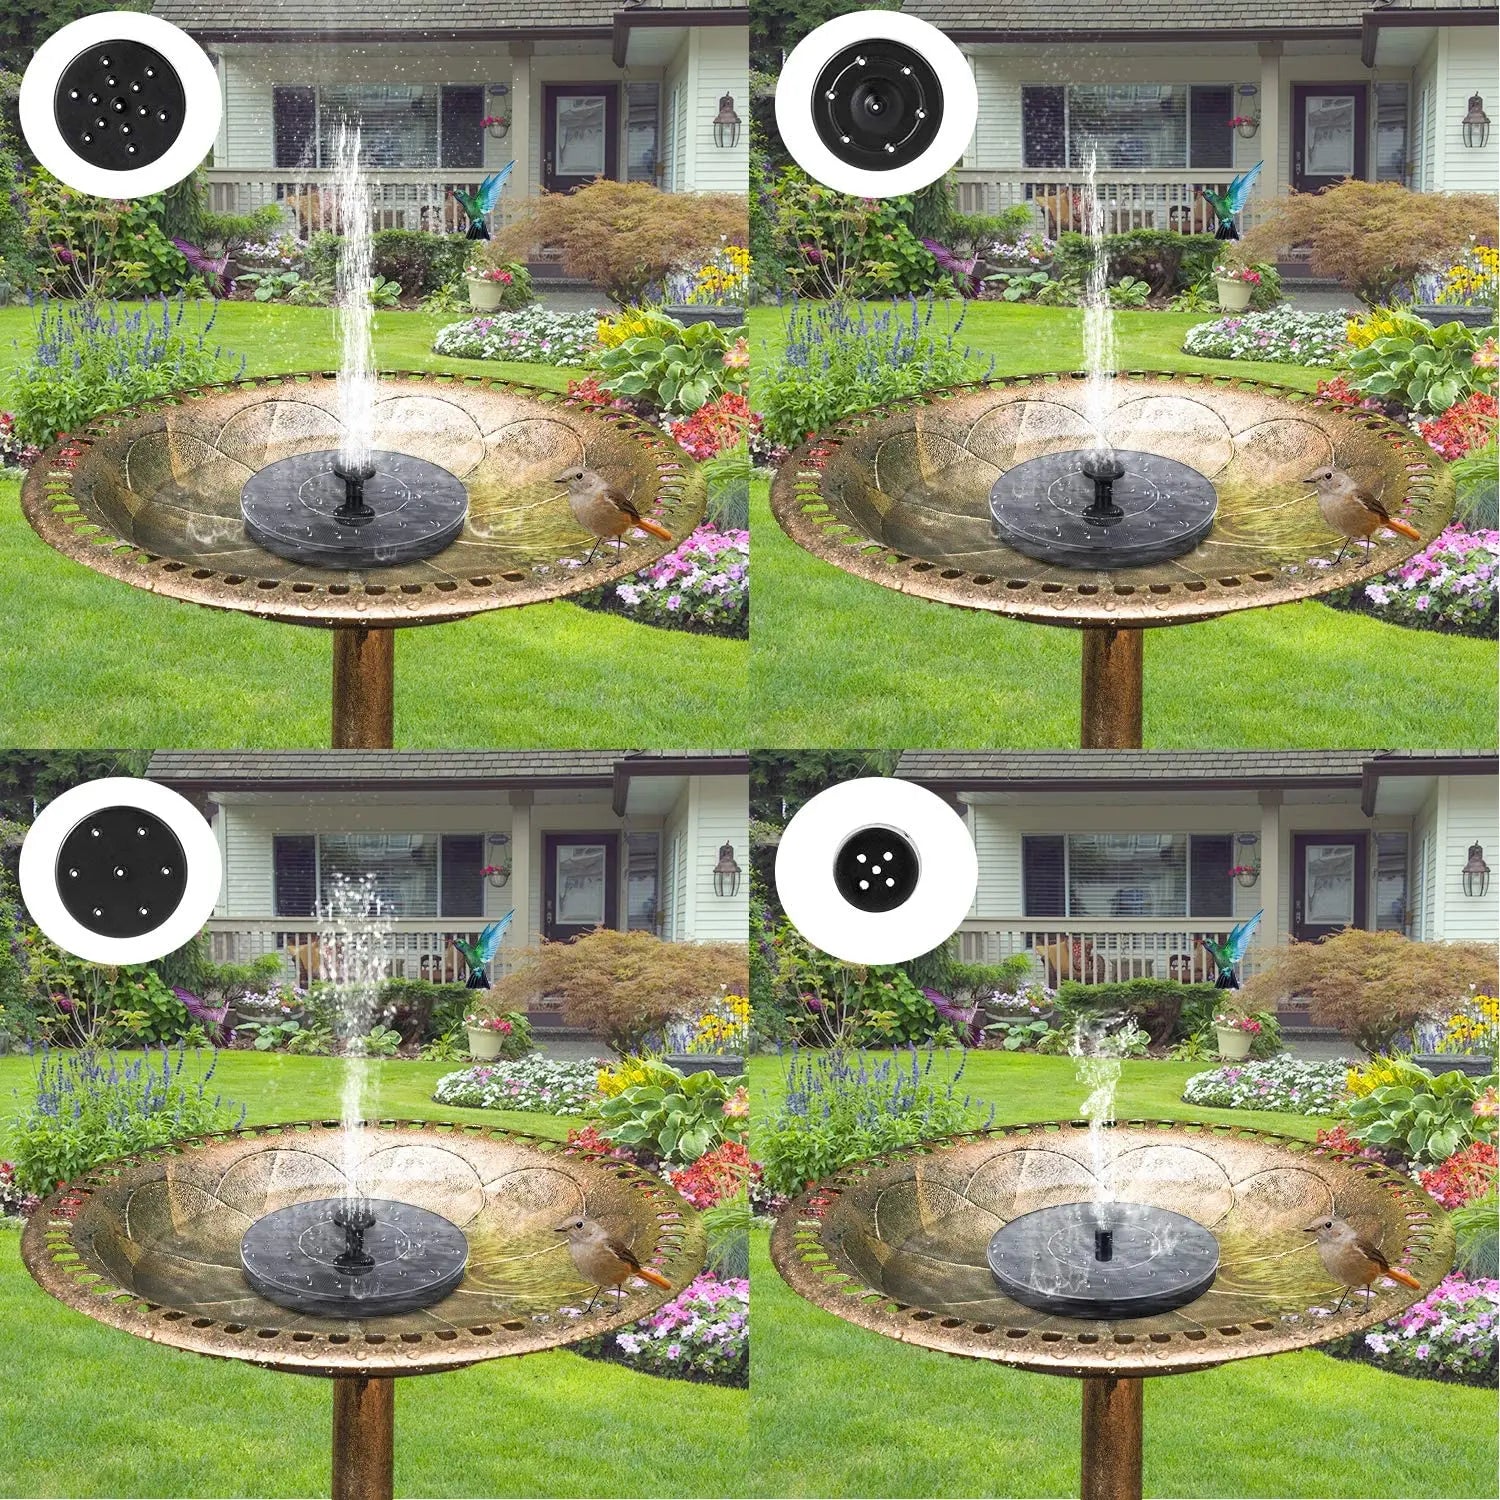 Floating Solar Fountain, Self-powered, no batteries needed, ideal for everyday use.